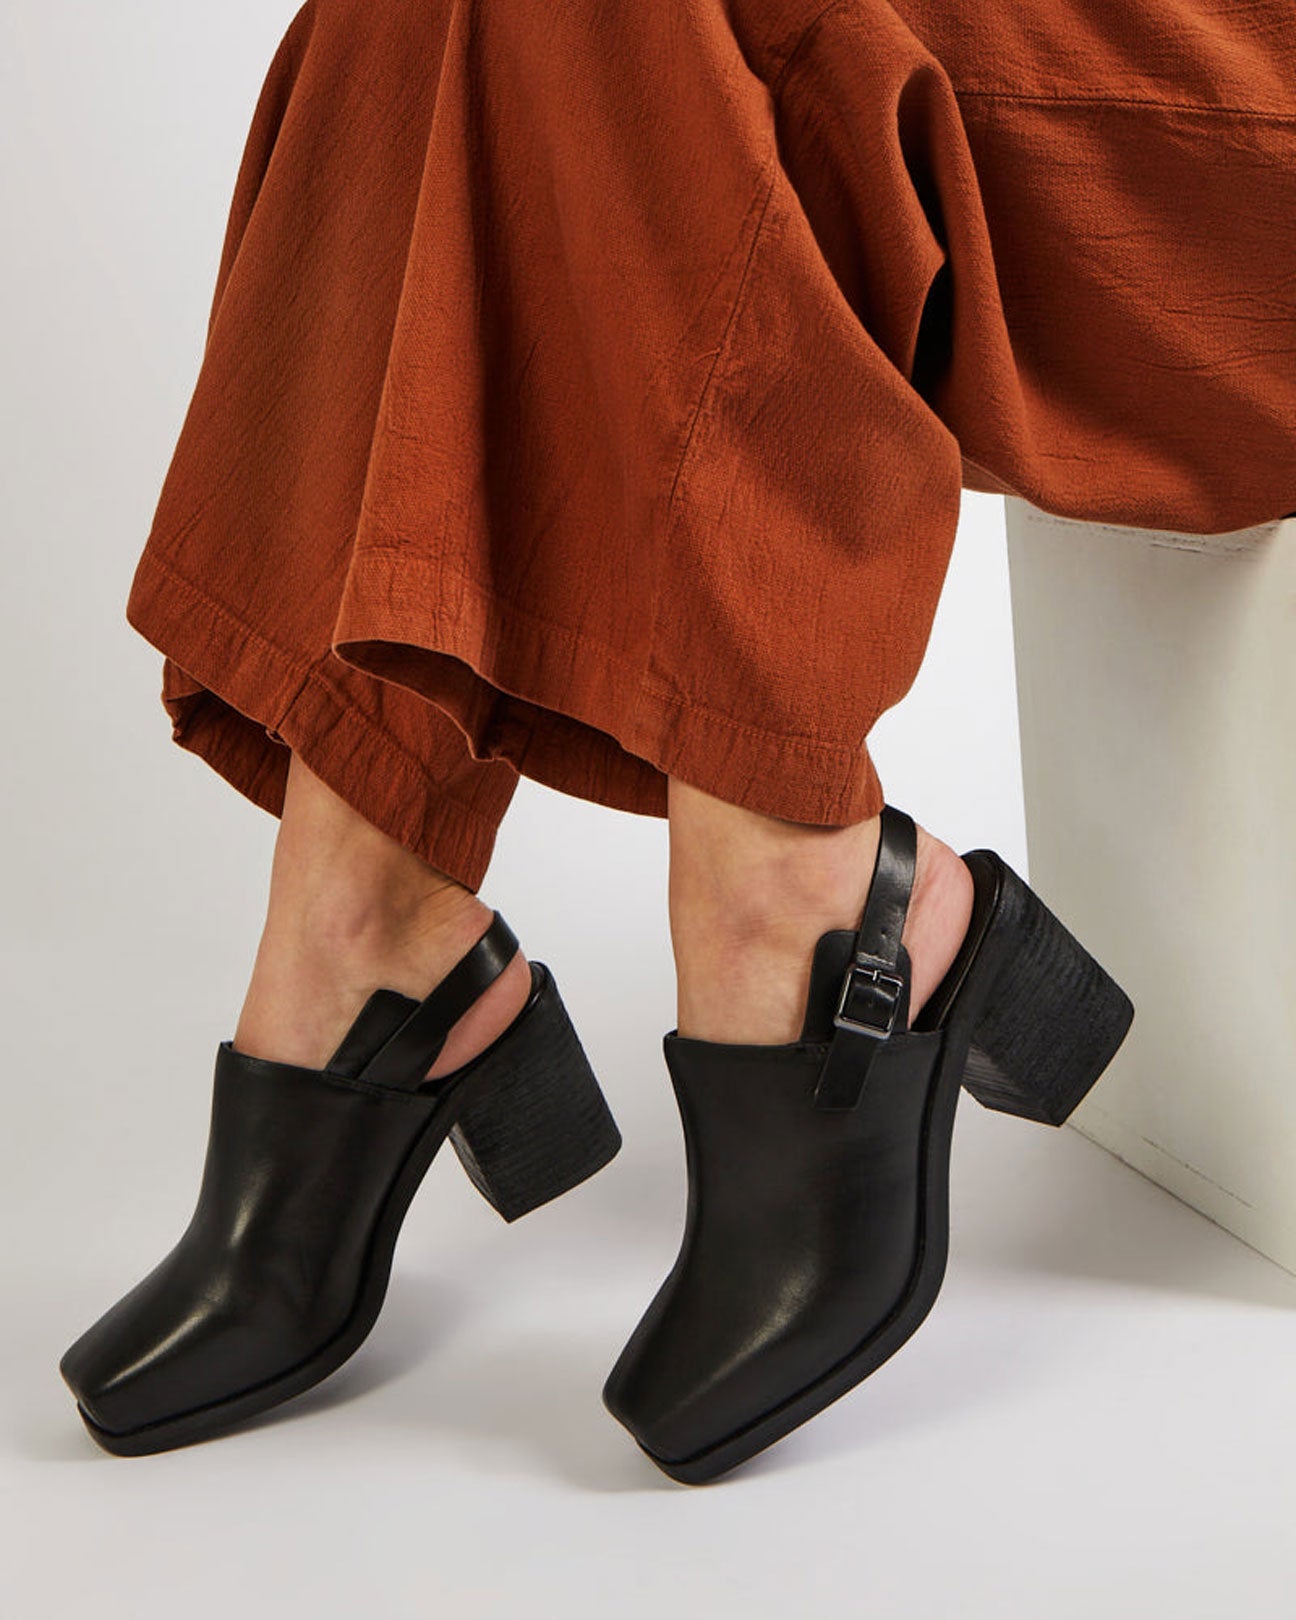 INTENTIONALLY BLANK Honcho Mule in Black available at Lahn.shop